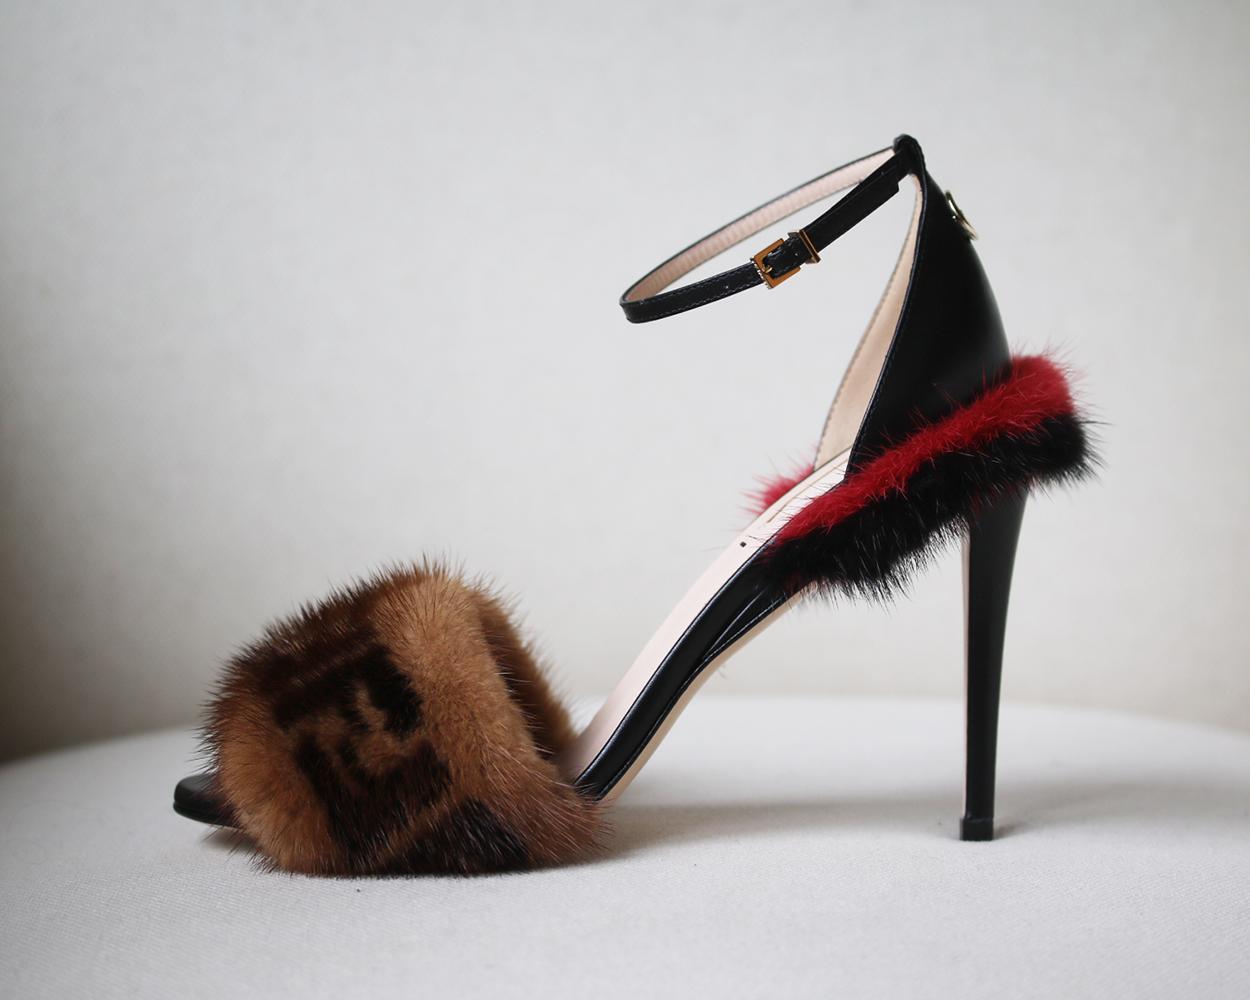 Fendi's iconic FF logo gets upgraded in lush mink fur on a fabulously fun ankle-strap sandal made in Italy. Buckle fastening on the ankle. Leather heel and strap. Mink trimmed detail. Color: brown. Heel measures approx. 4 inches. Does not come with